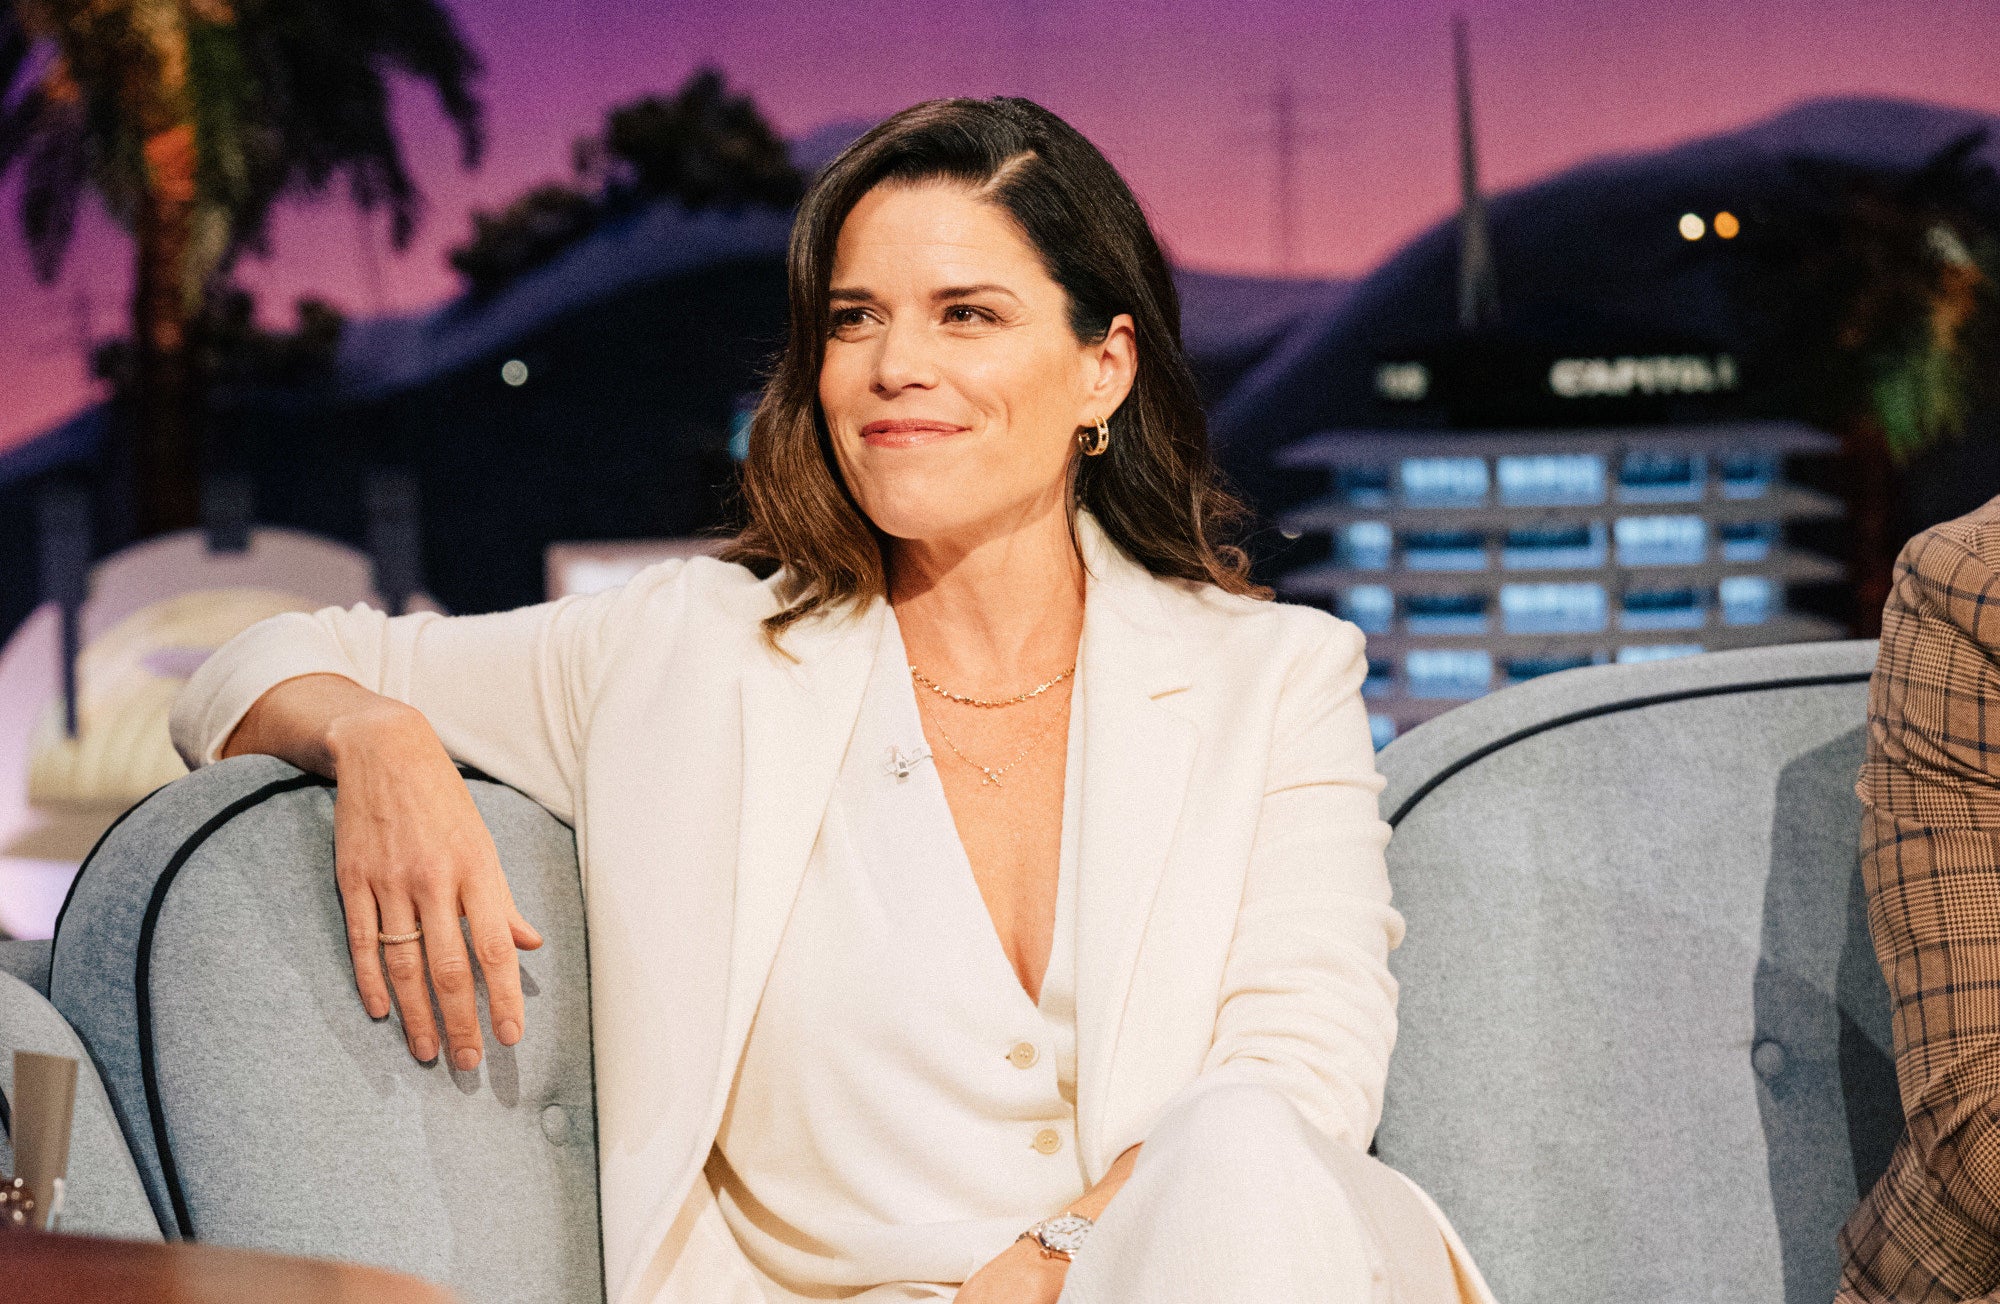 Neve Campbell in a white suit